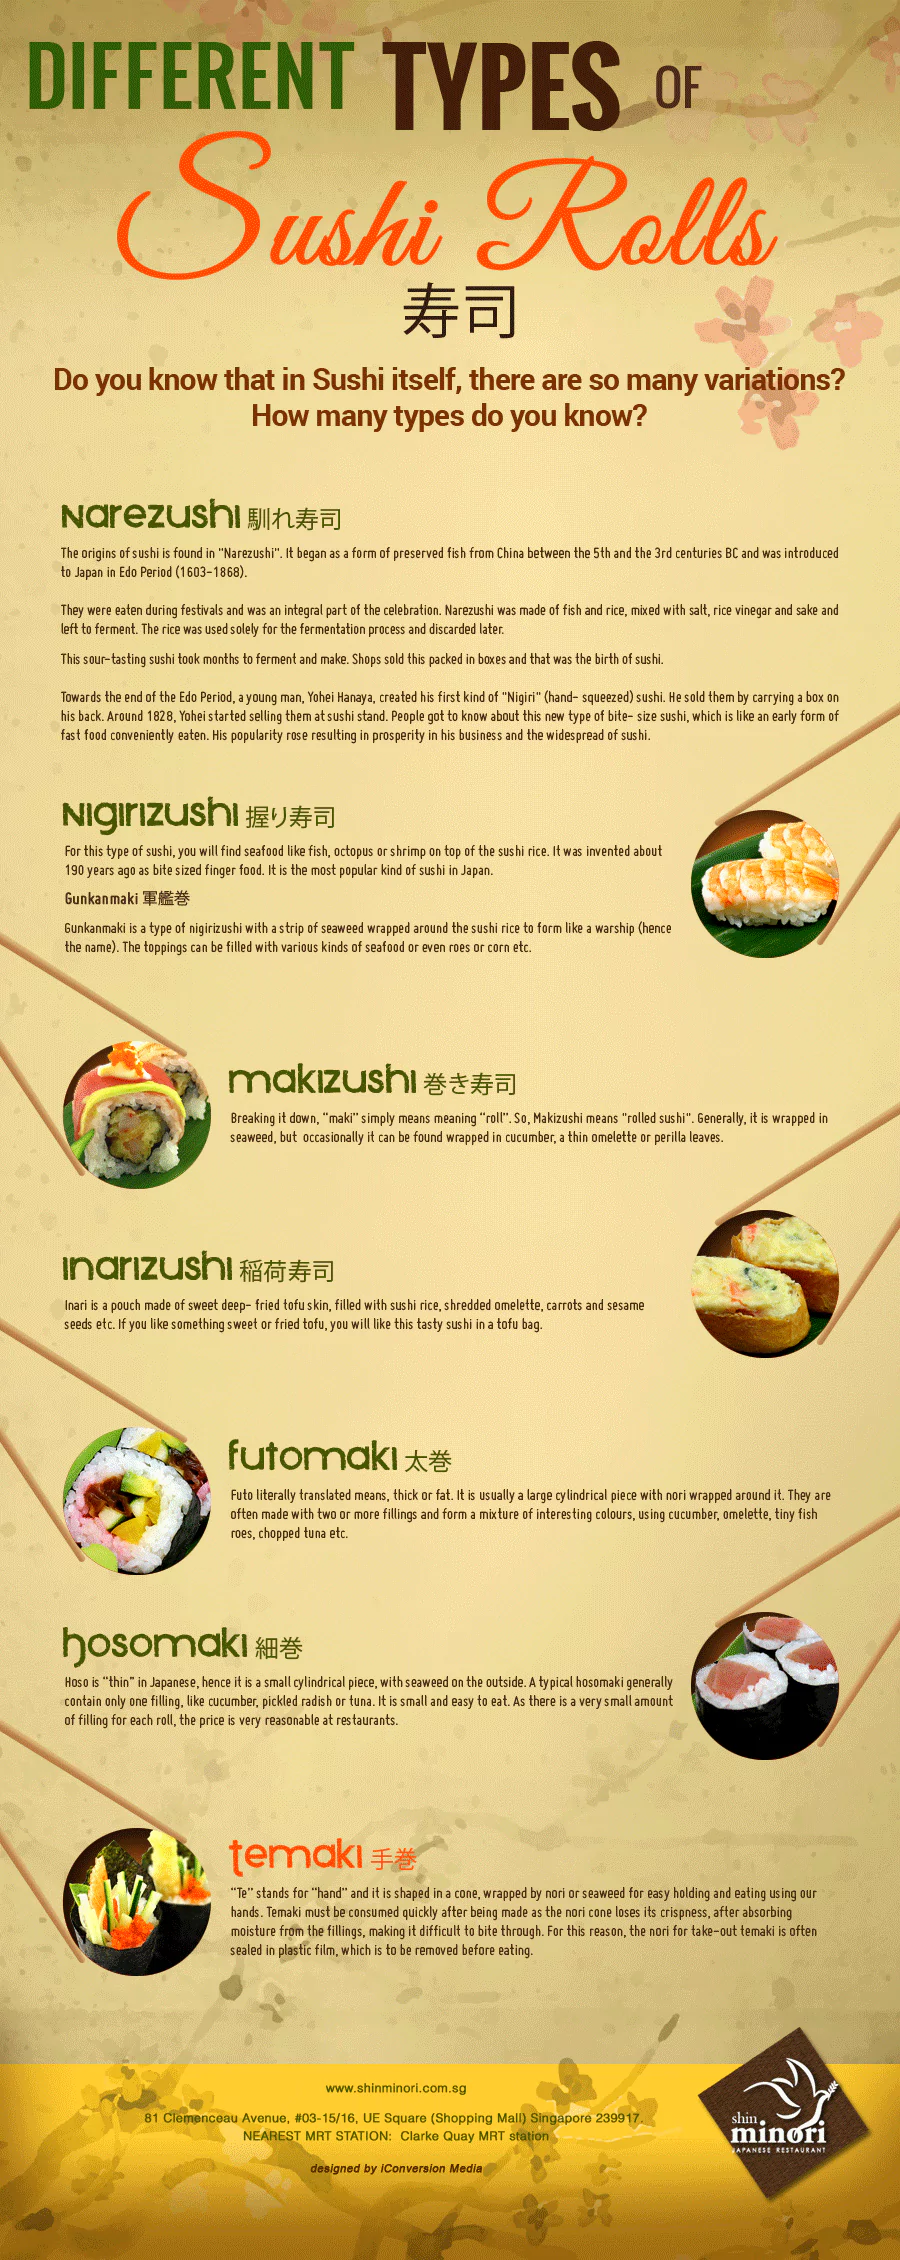 Different Types of Sushi Rolls